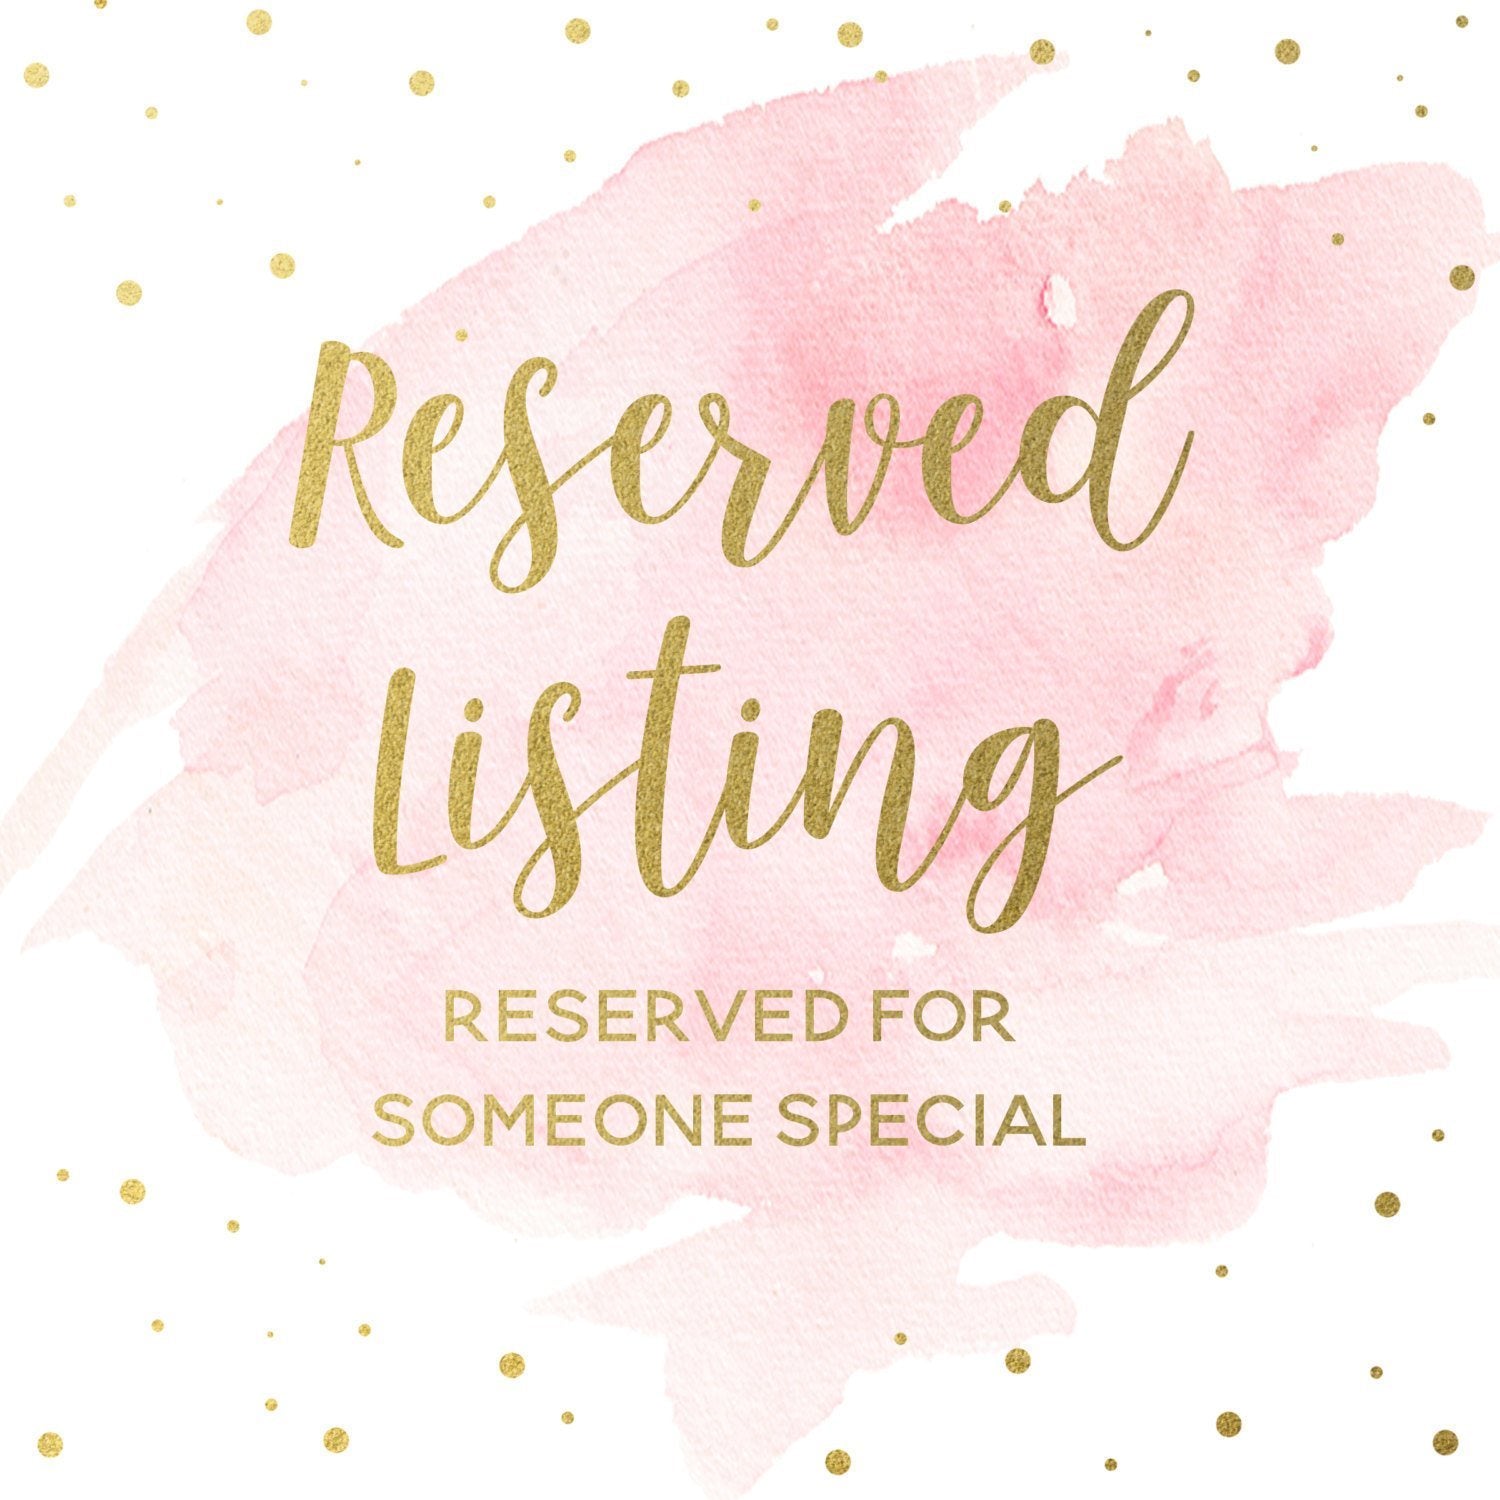 Reserved Listing - MO SHIP